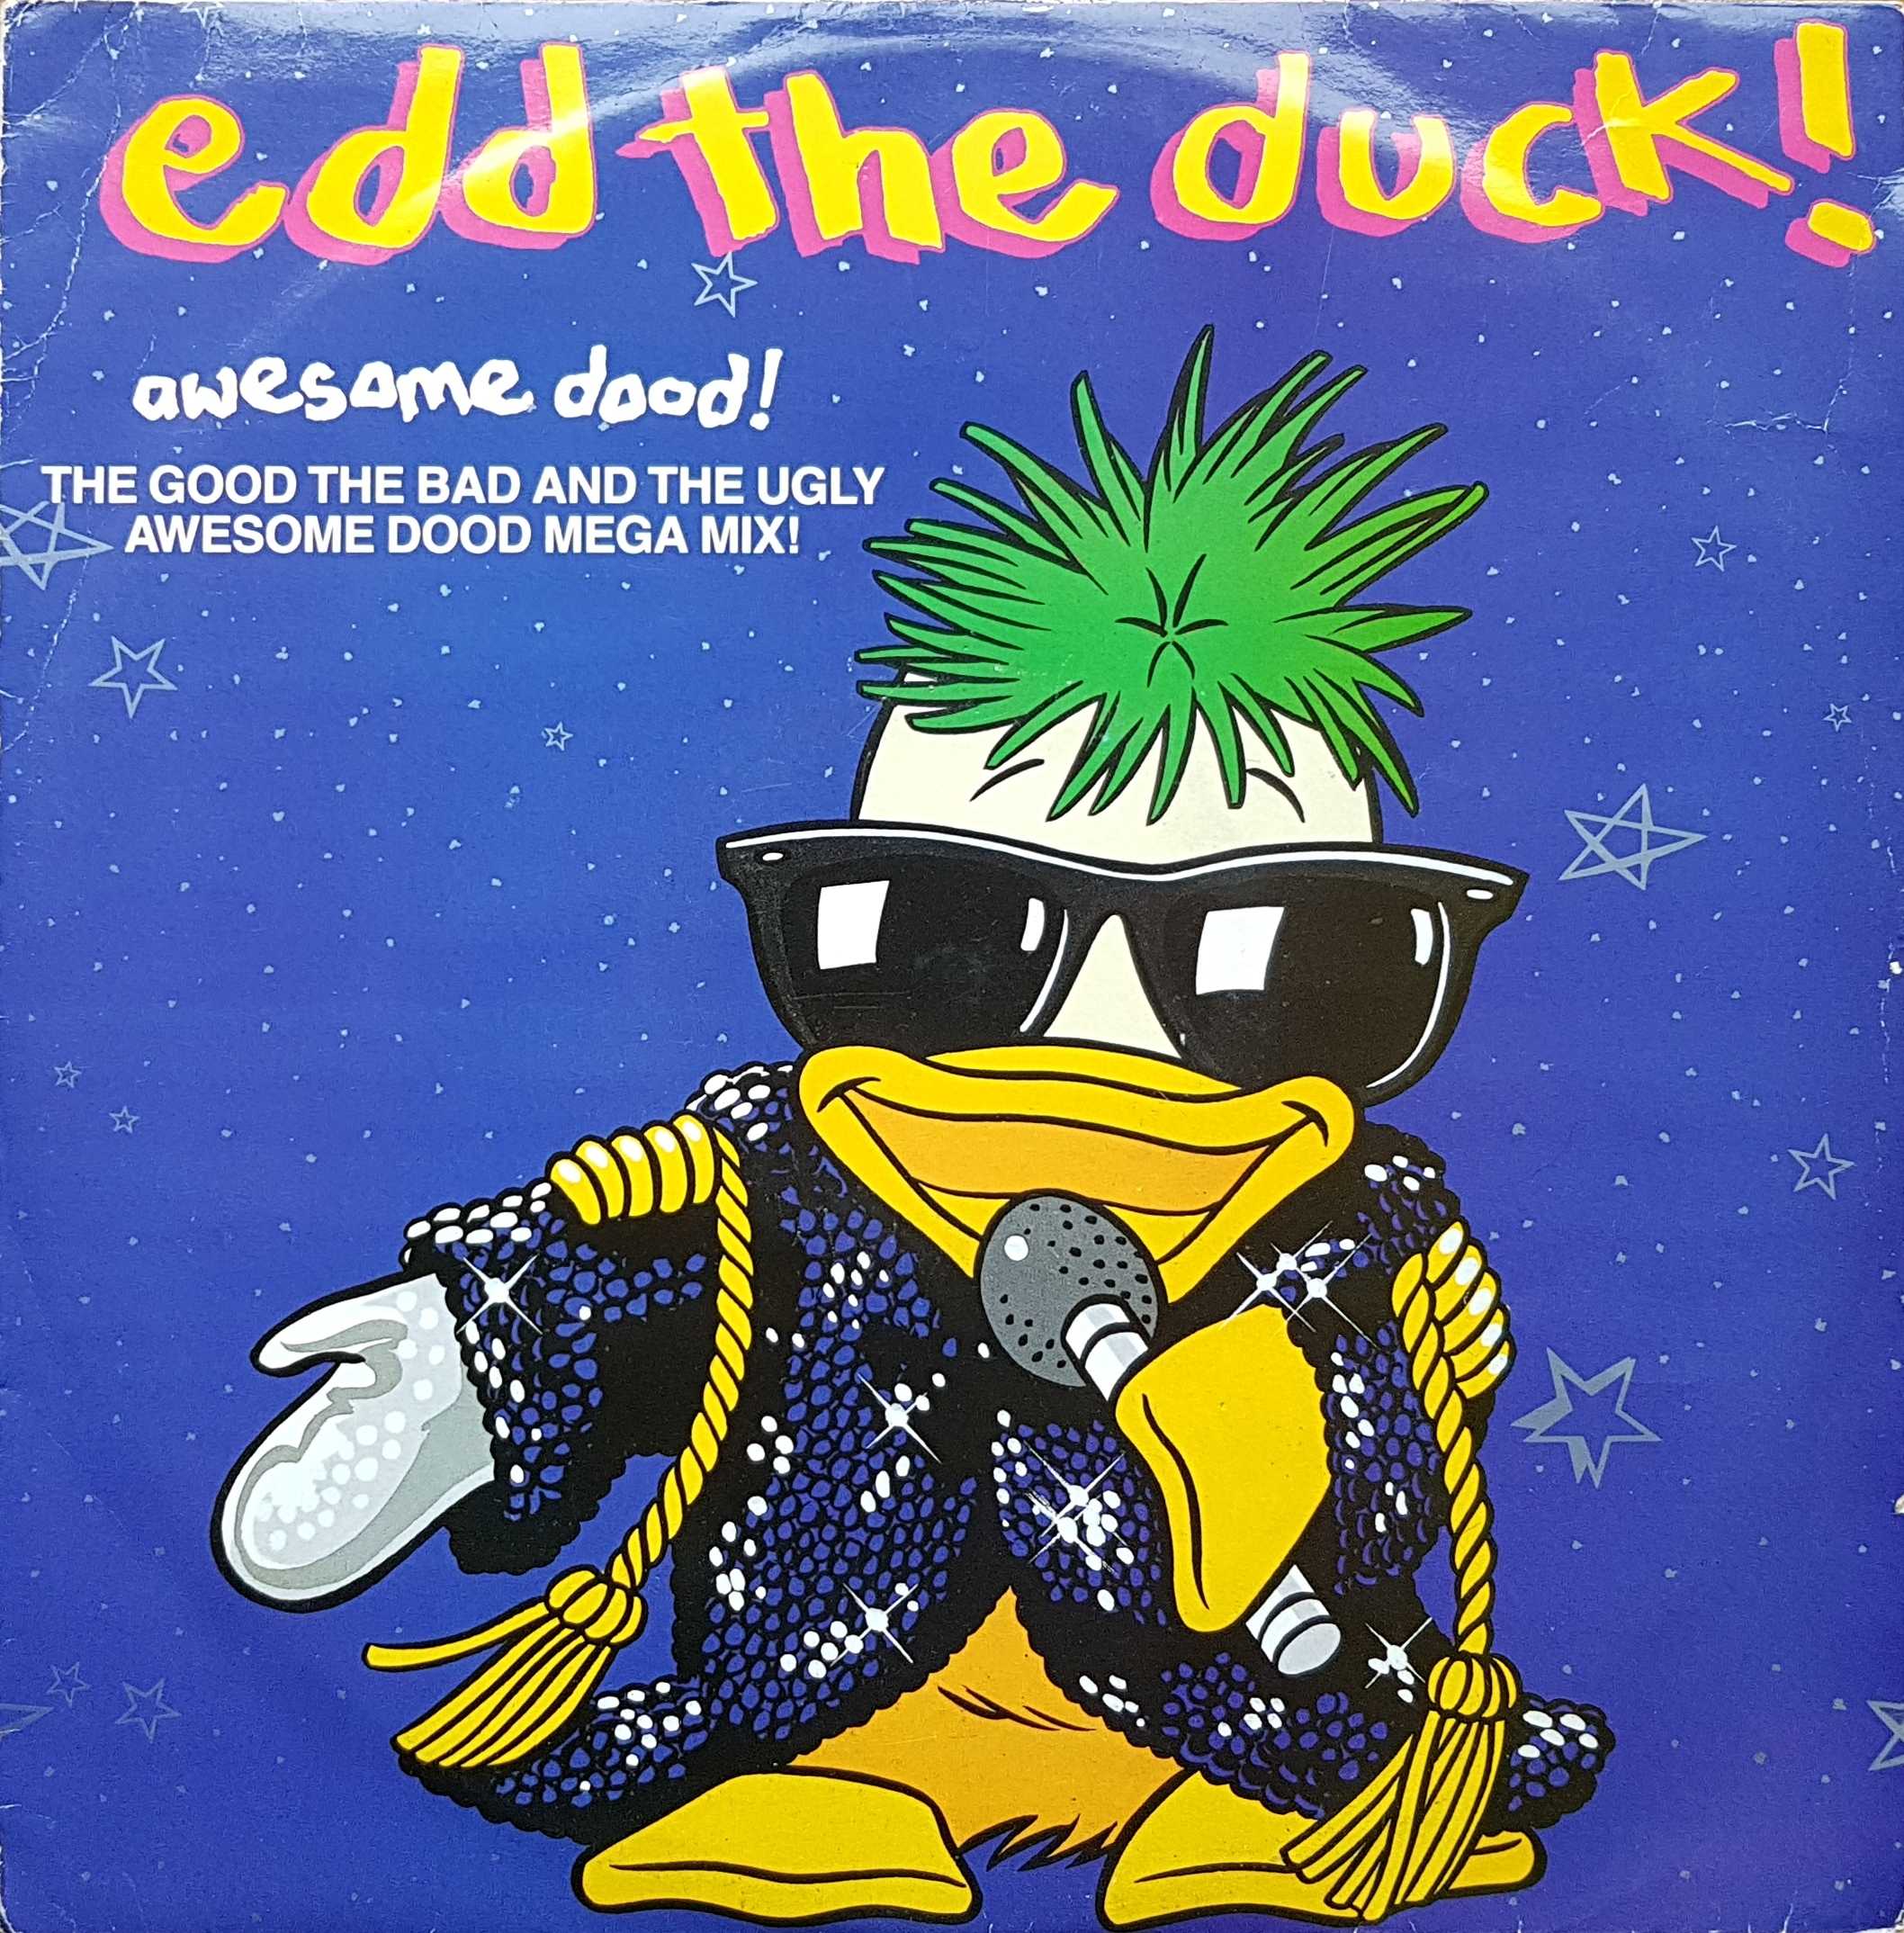 Picture of 12 RSL 001 Awesome dood ! by artist Roy Hamilton (Edd the duck) from the BBC records and Tapes library